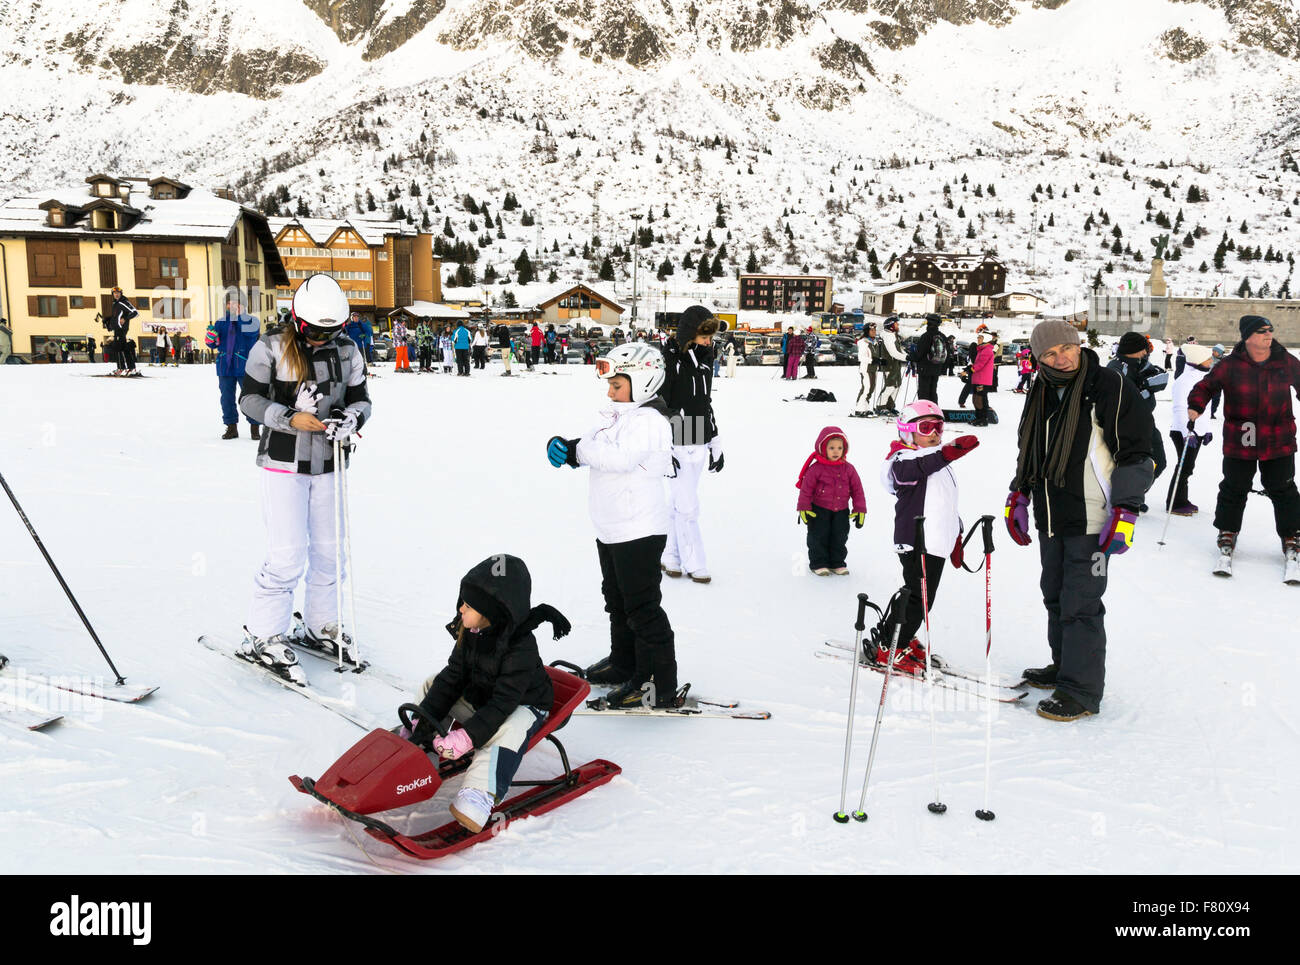 PONTE DI LEGNO, ITALY - DECEMBER 25: Families on holiday on the slopes of the Italian Alps on Thursday, December 25, 2014. Stock Photo